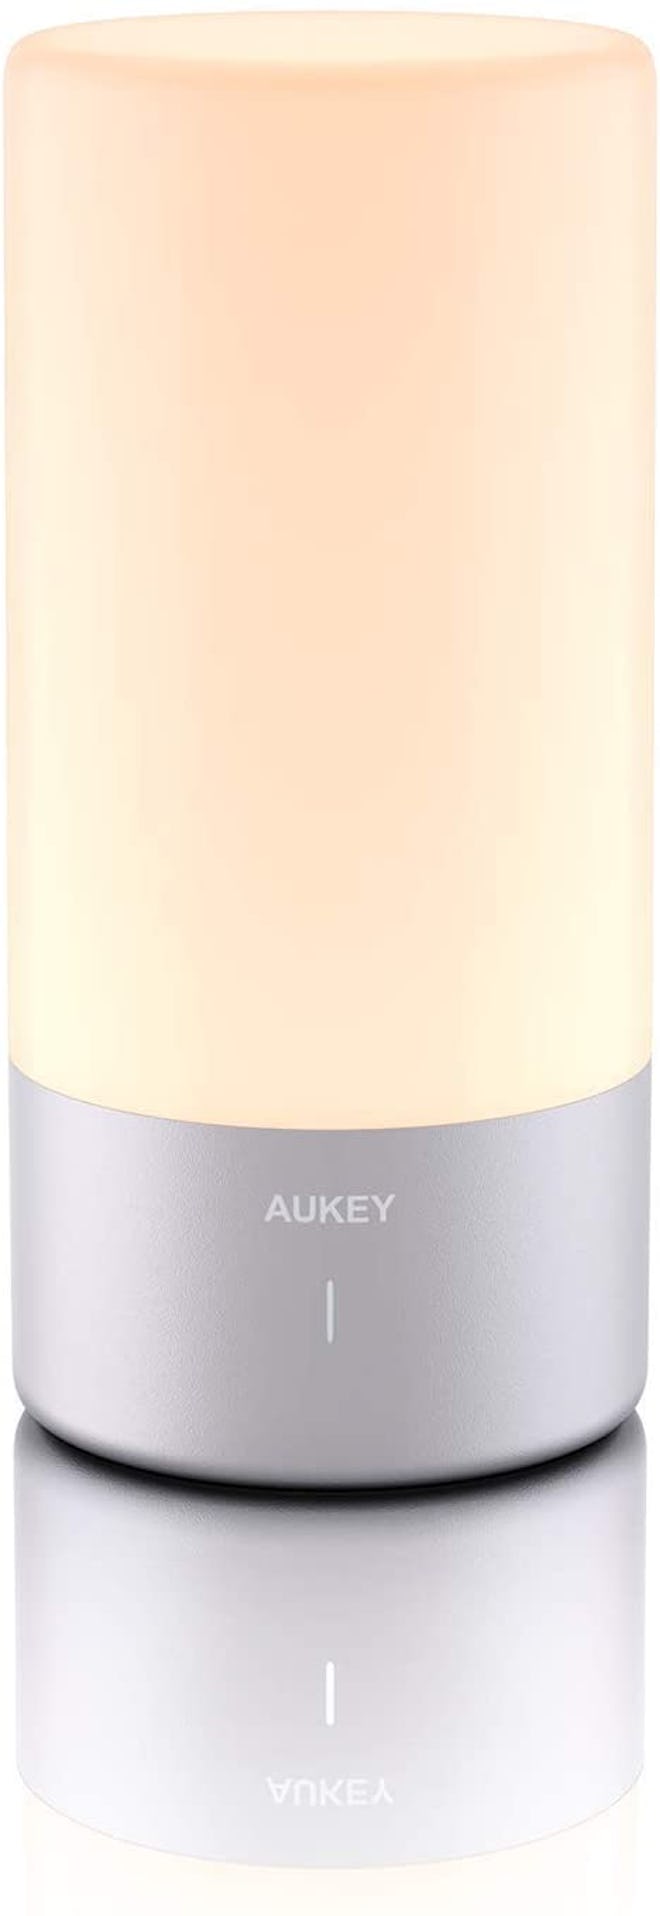 Aukey Touch Sensor Bedside Lamp 